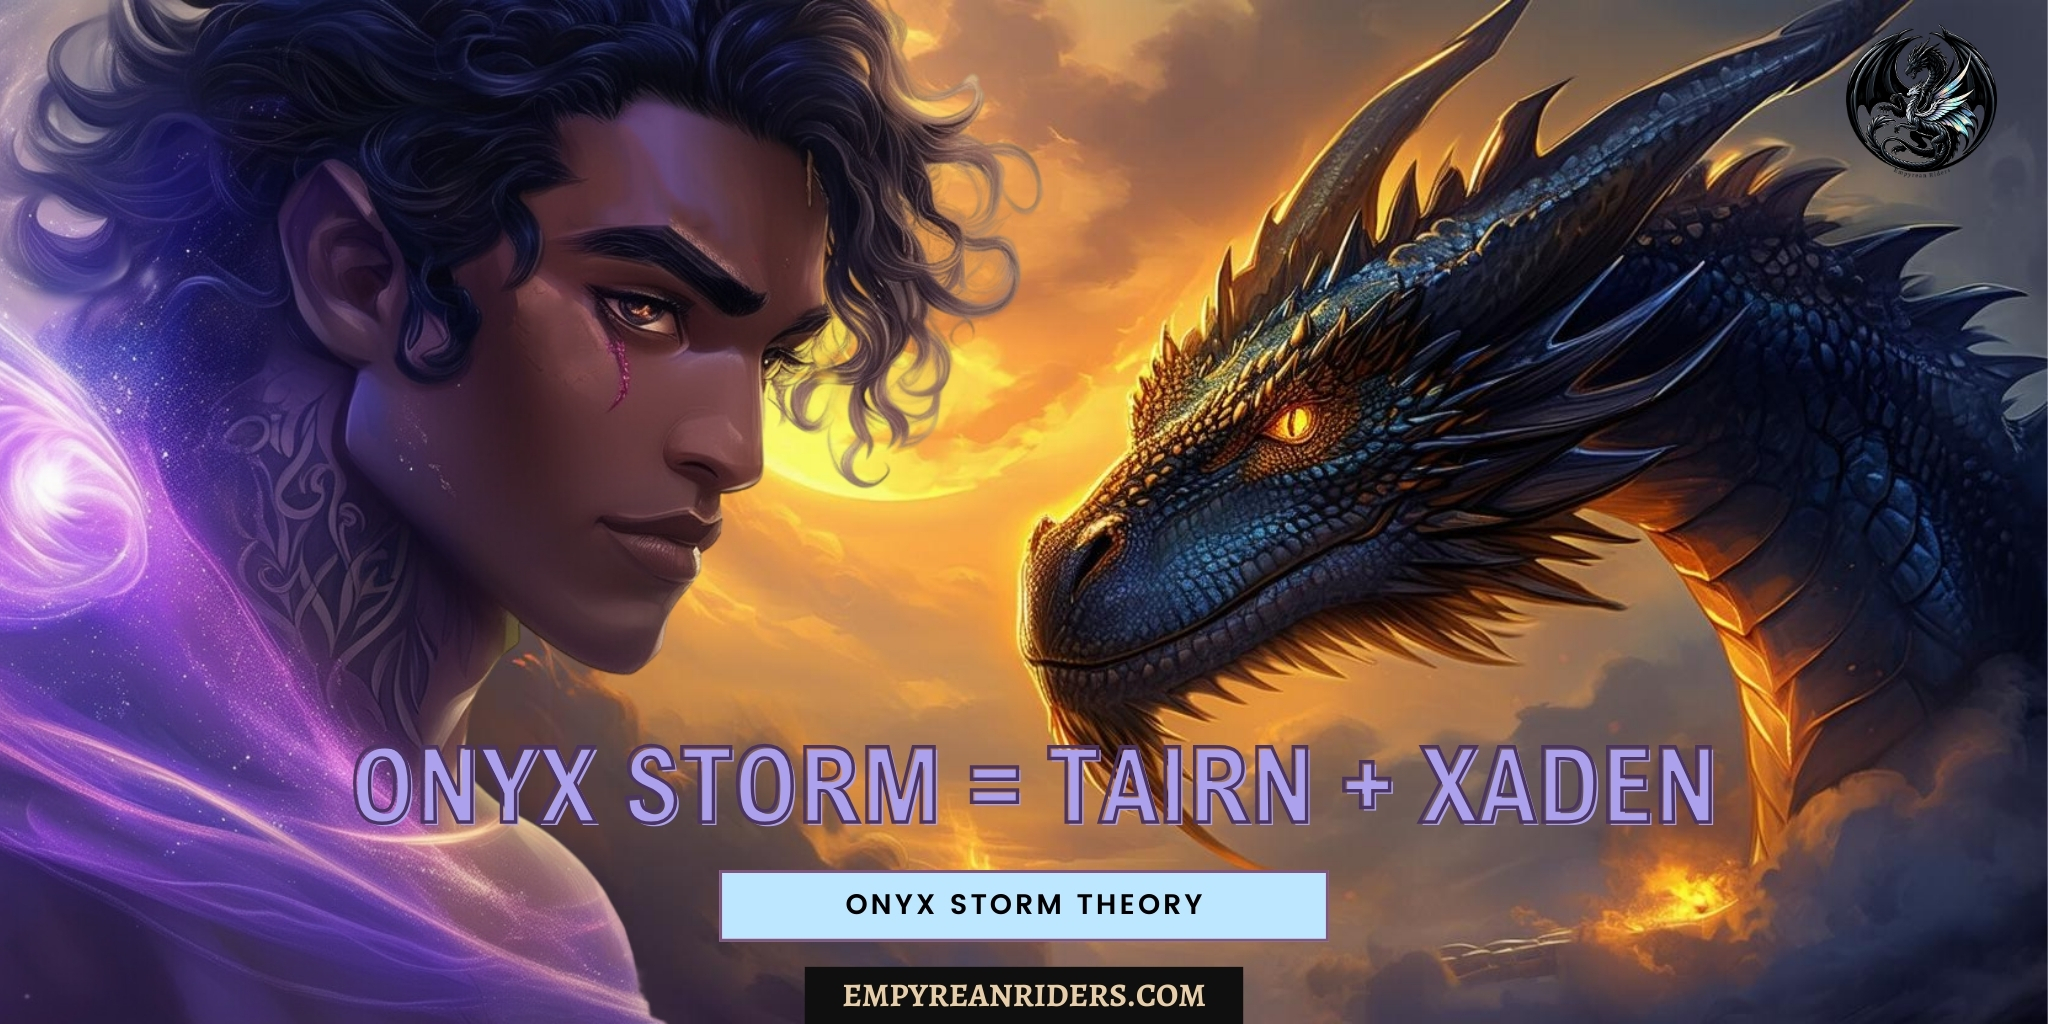 Onyx Storm theory - The Onyx Storm is about Xaden and Tairn